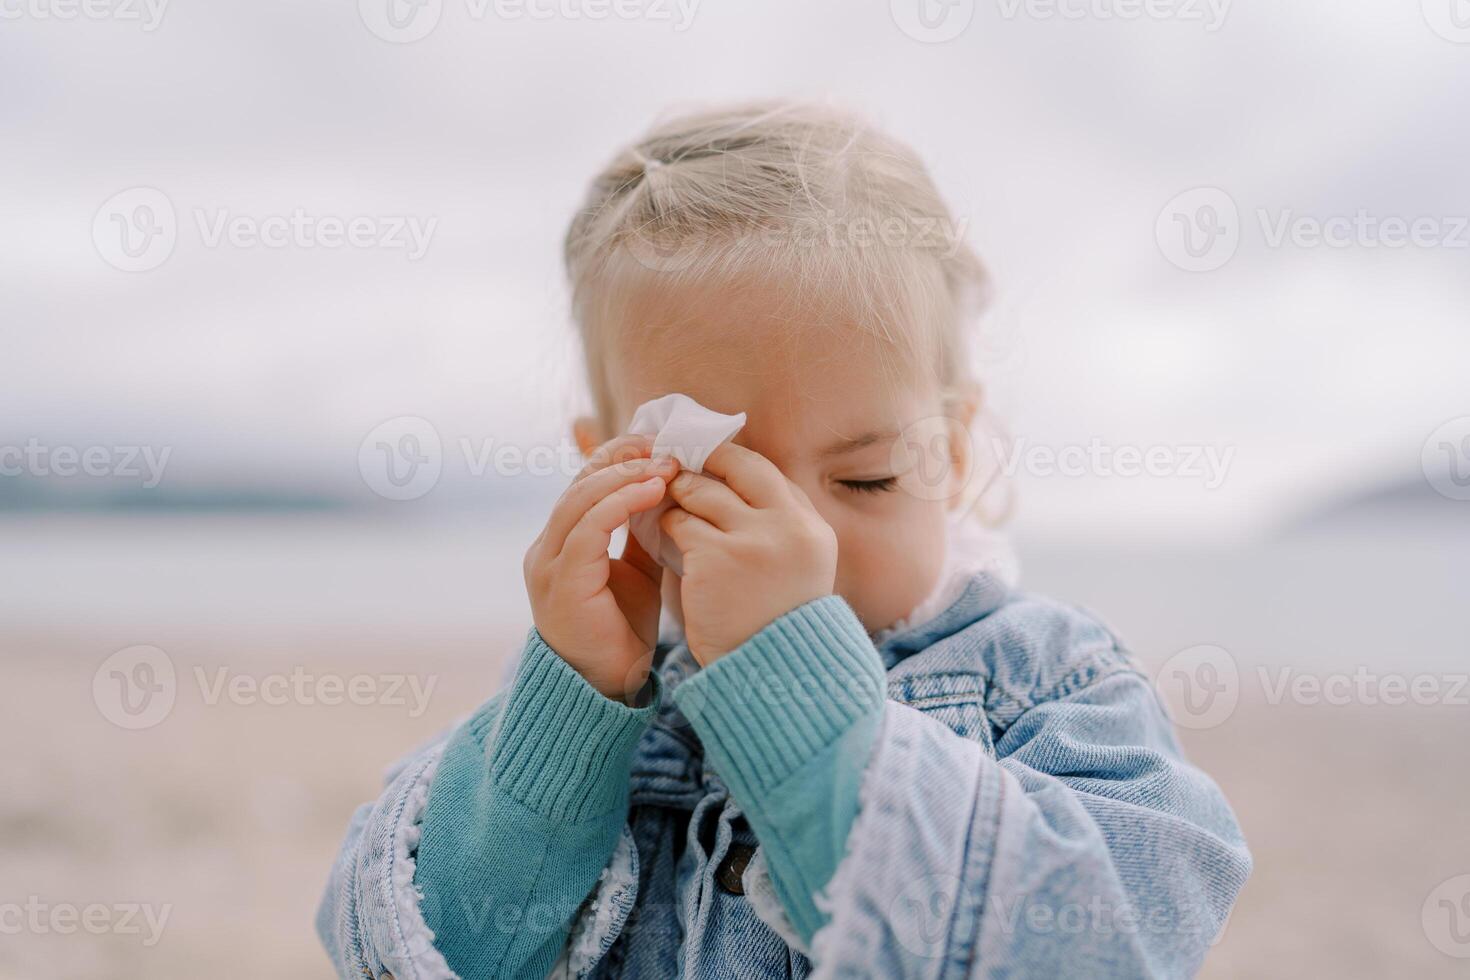 Little girl with closed eyes wipes her forehead with a napkin photo